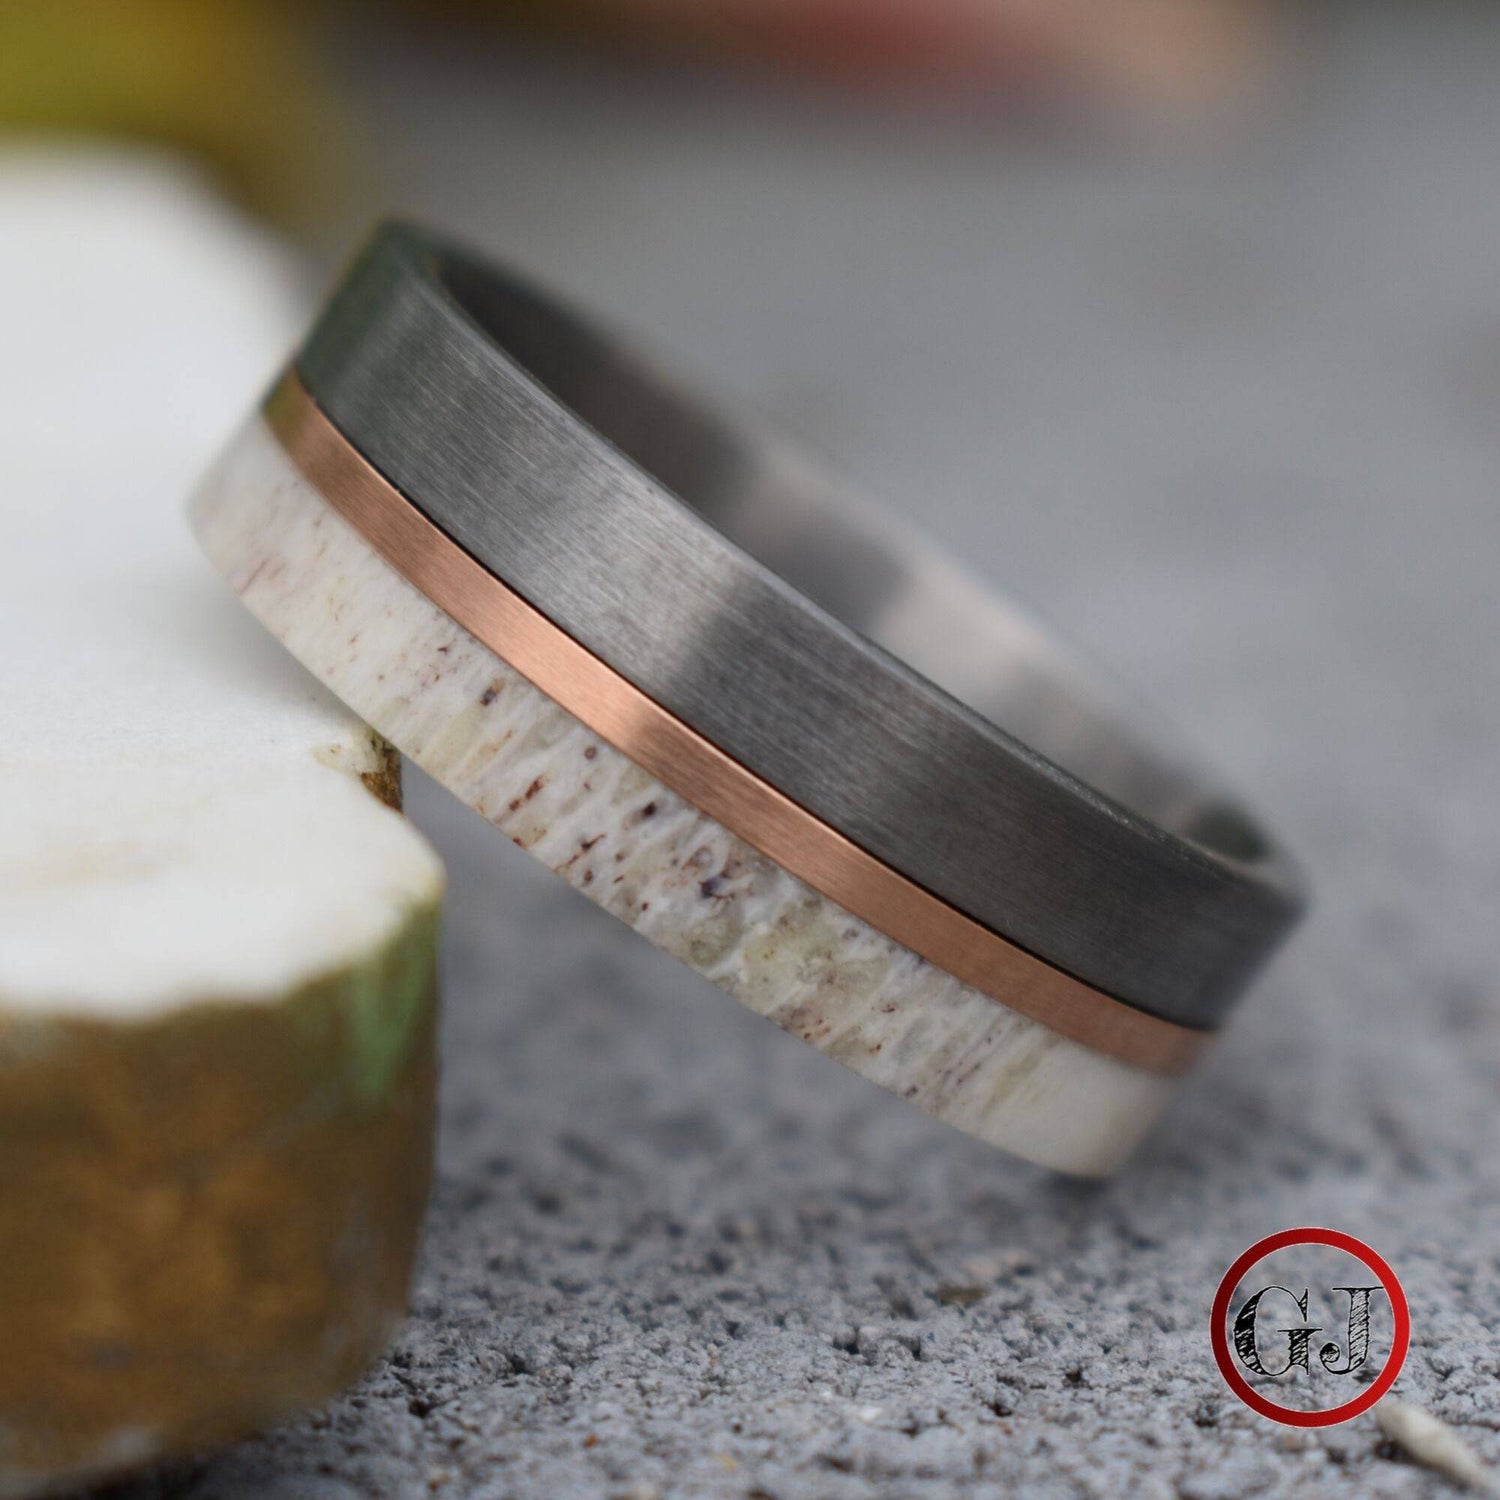 Deer Antler and Brushed Silver Tungsten 8mm Ring with Rose Gold Center - Tungsten Titans